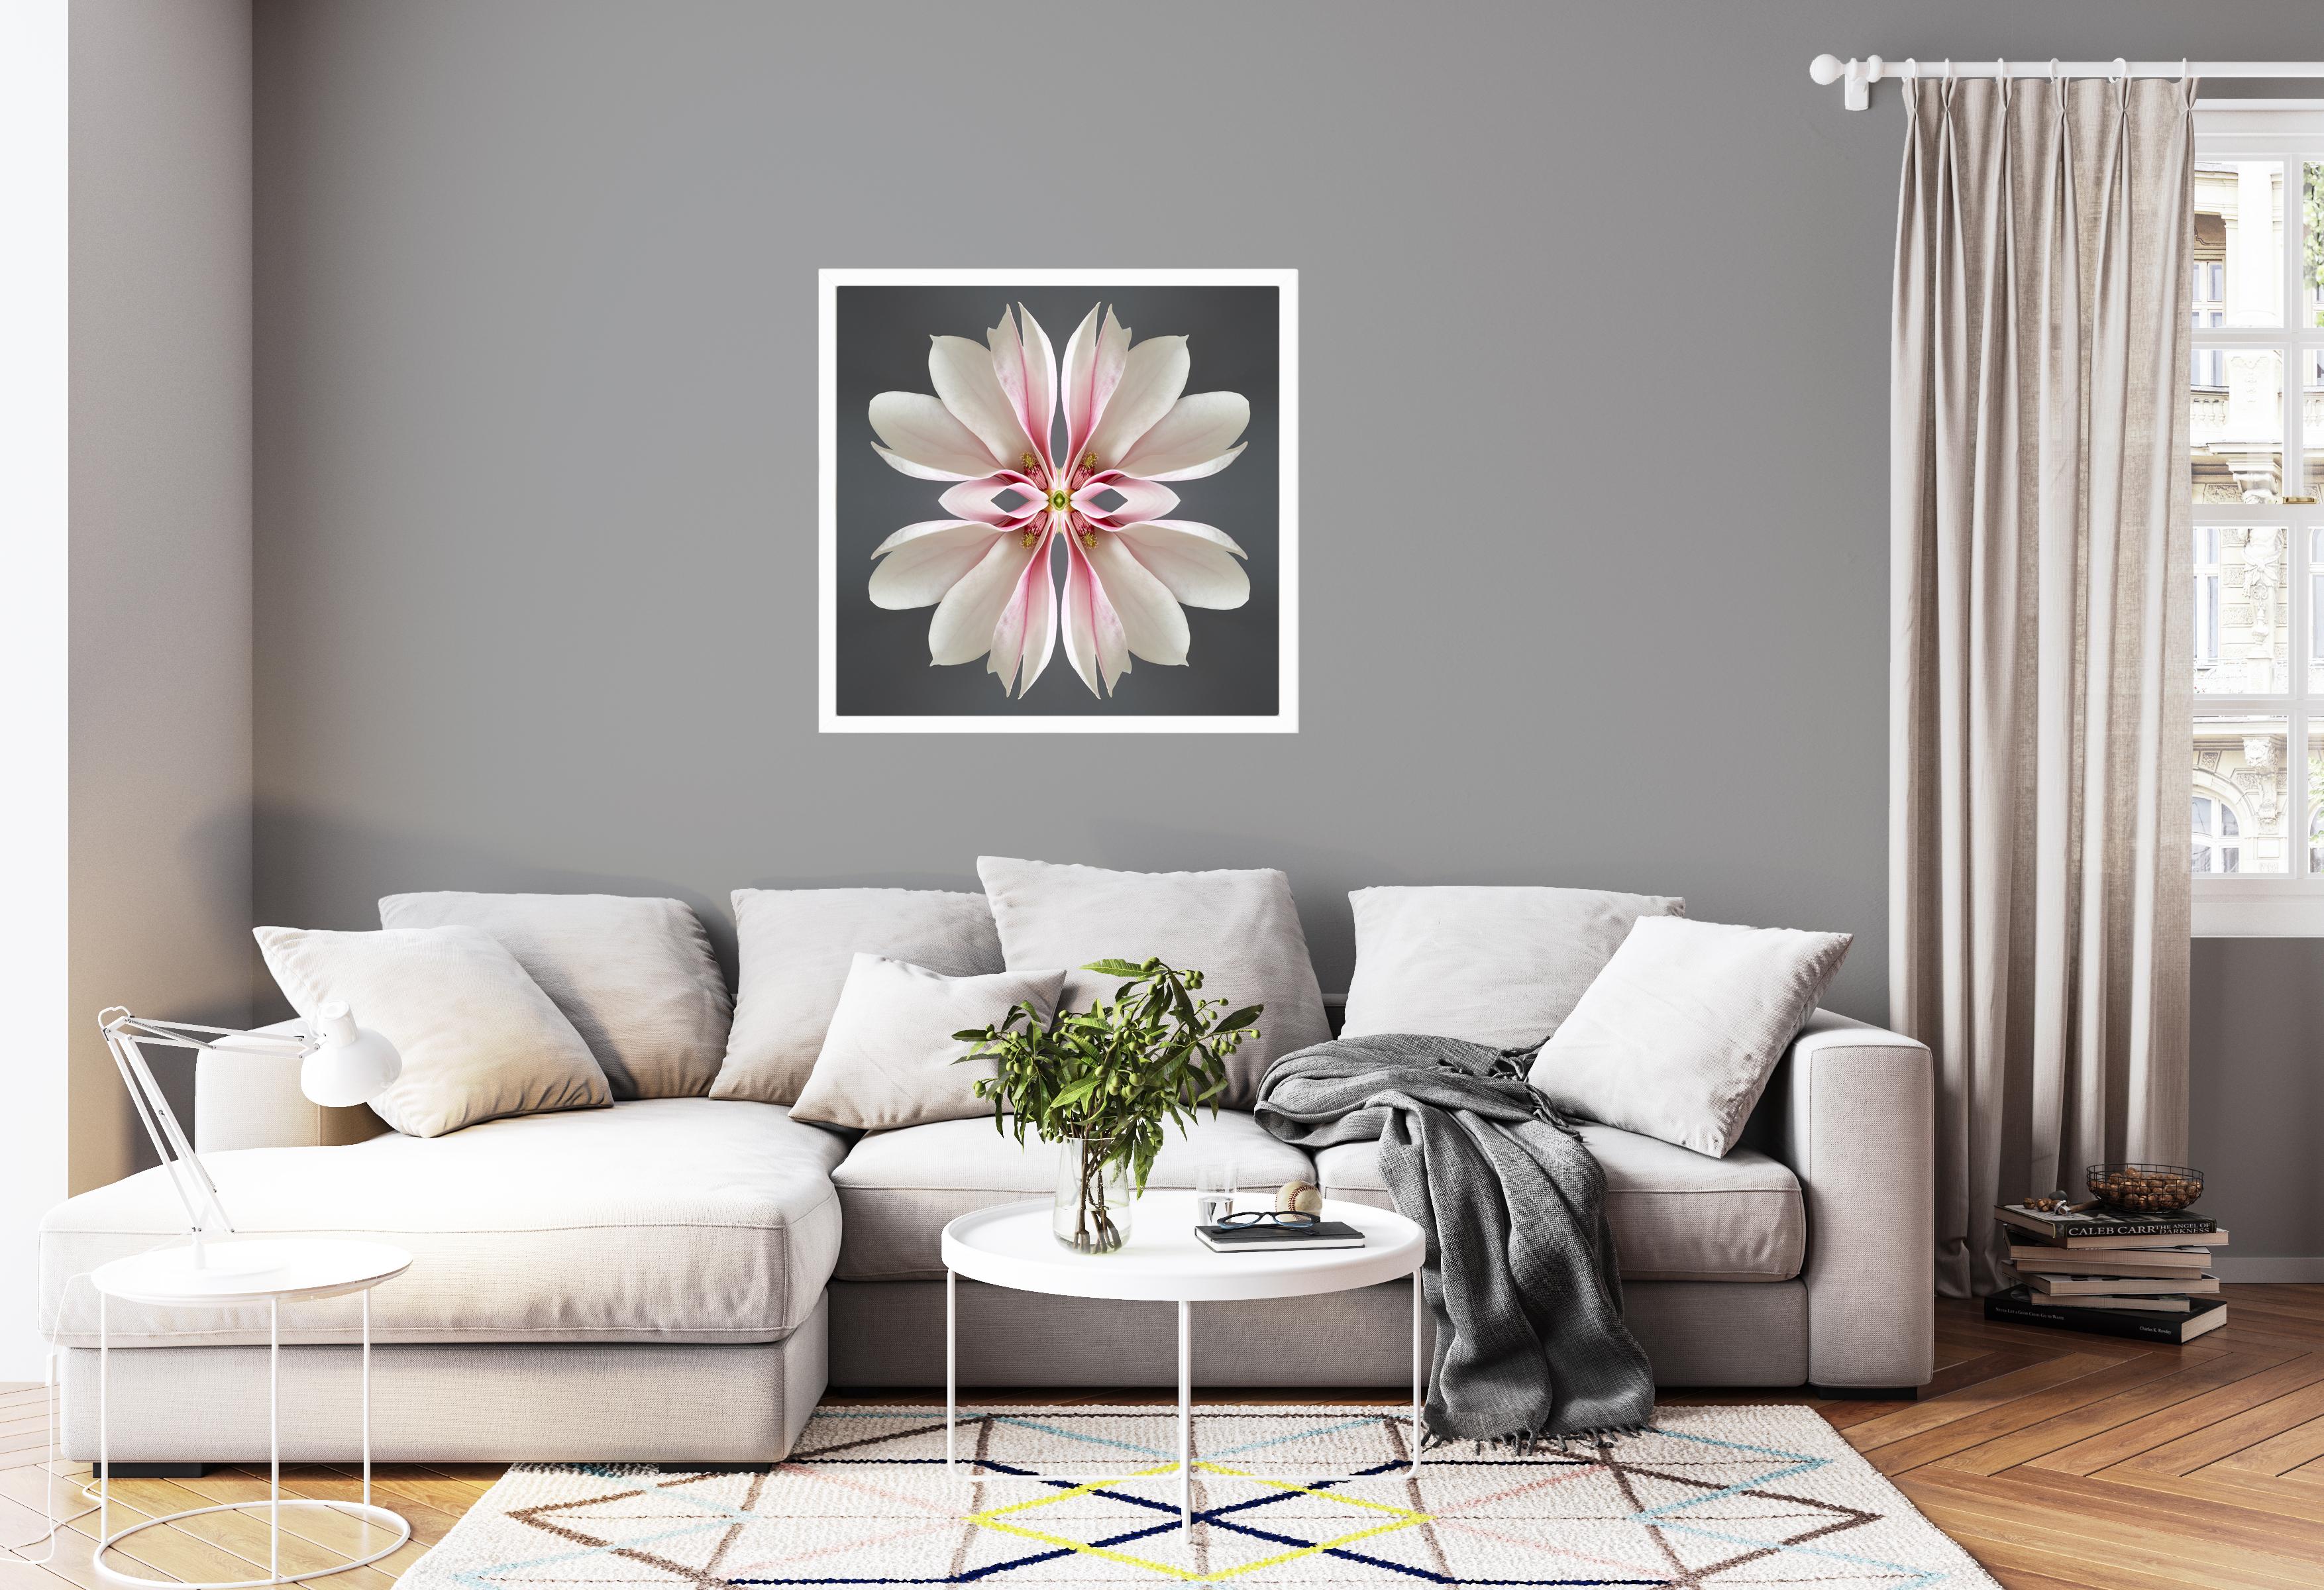 This print features the playful relationship between natural forms and botanicals. In this image Erin uses the natural composition of the pink and white Magnolia, and her own collage work, to create a hypnotic mandala with the floral. Some describe